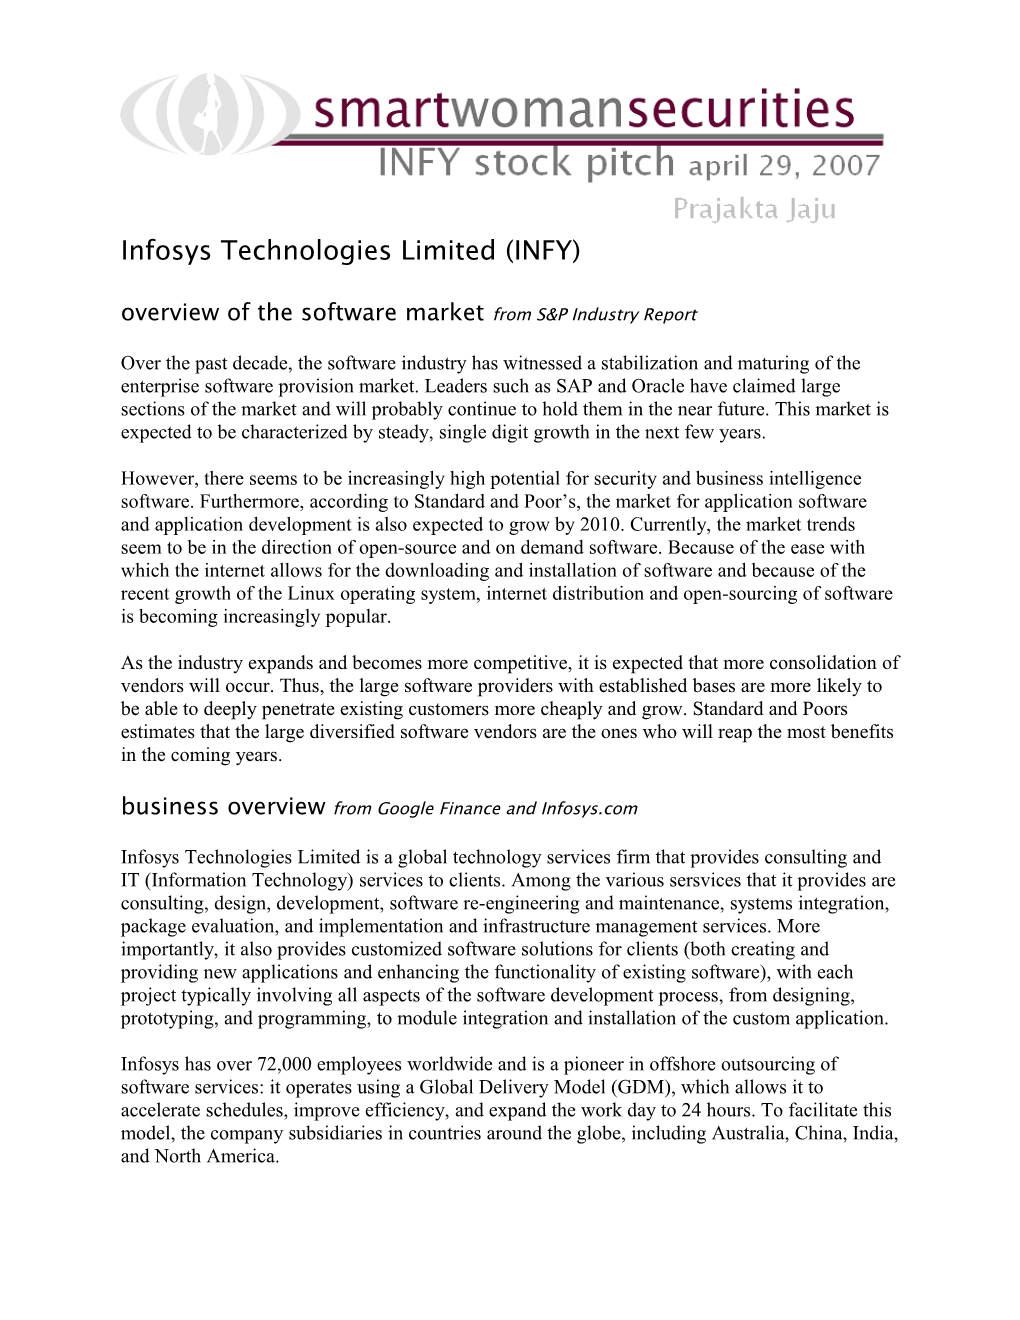 Infosys Technologies Limited (INFY)